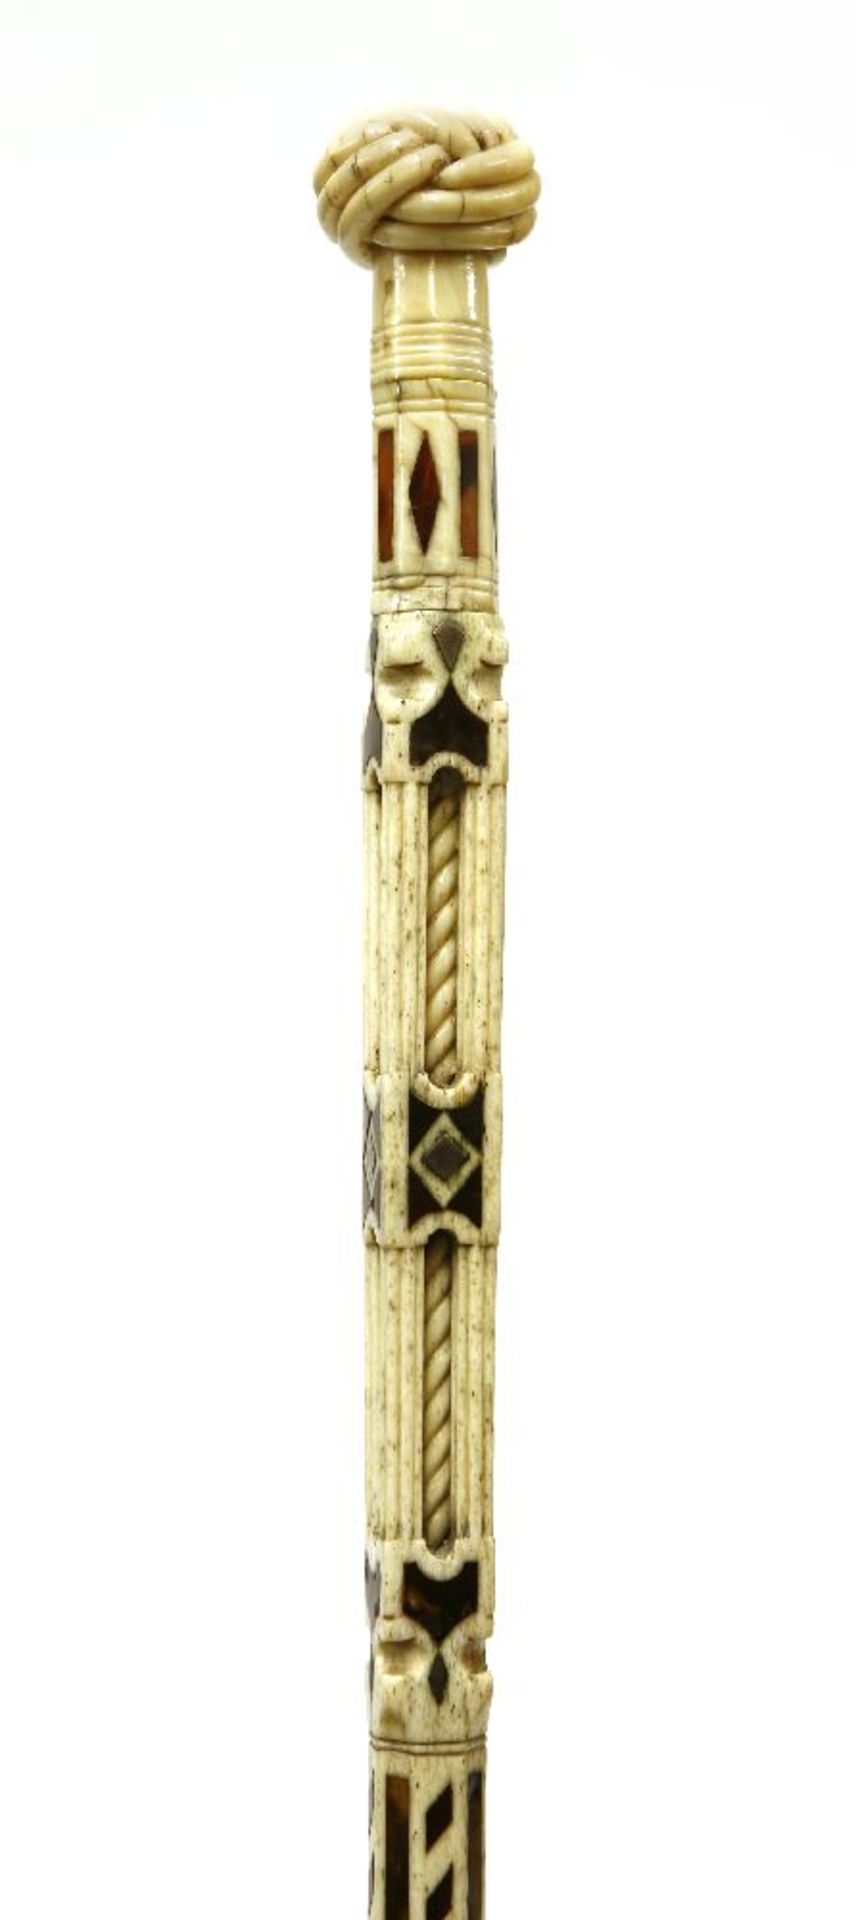 A fine and rare marine ivory and whalebone walking stick,with a Turk's knot over octagonal and